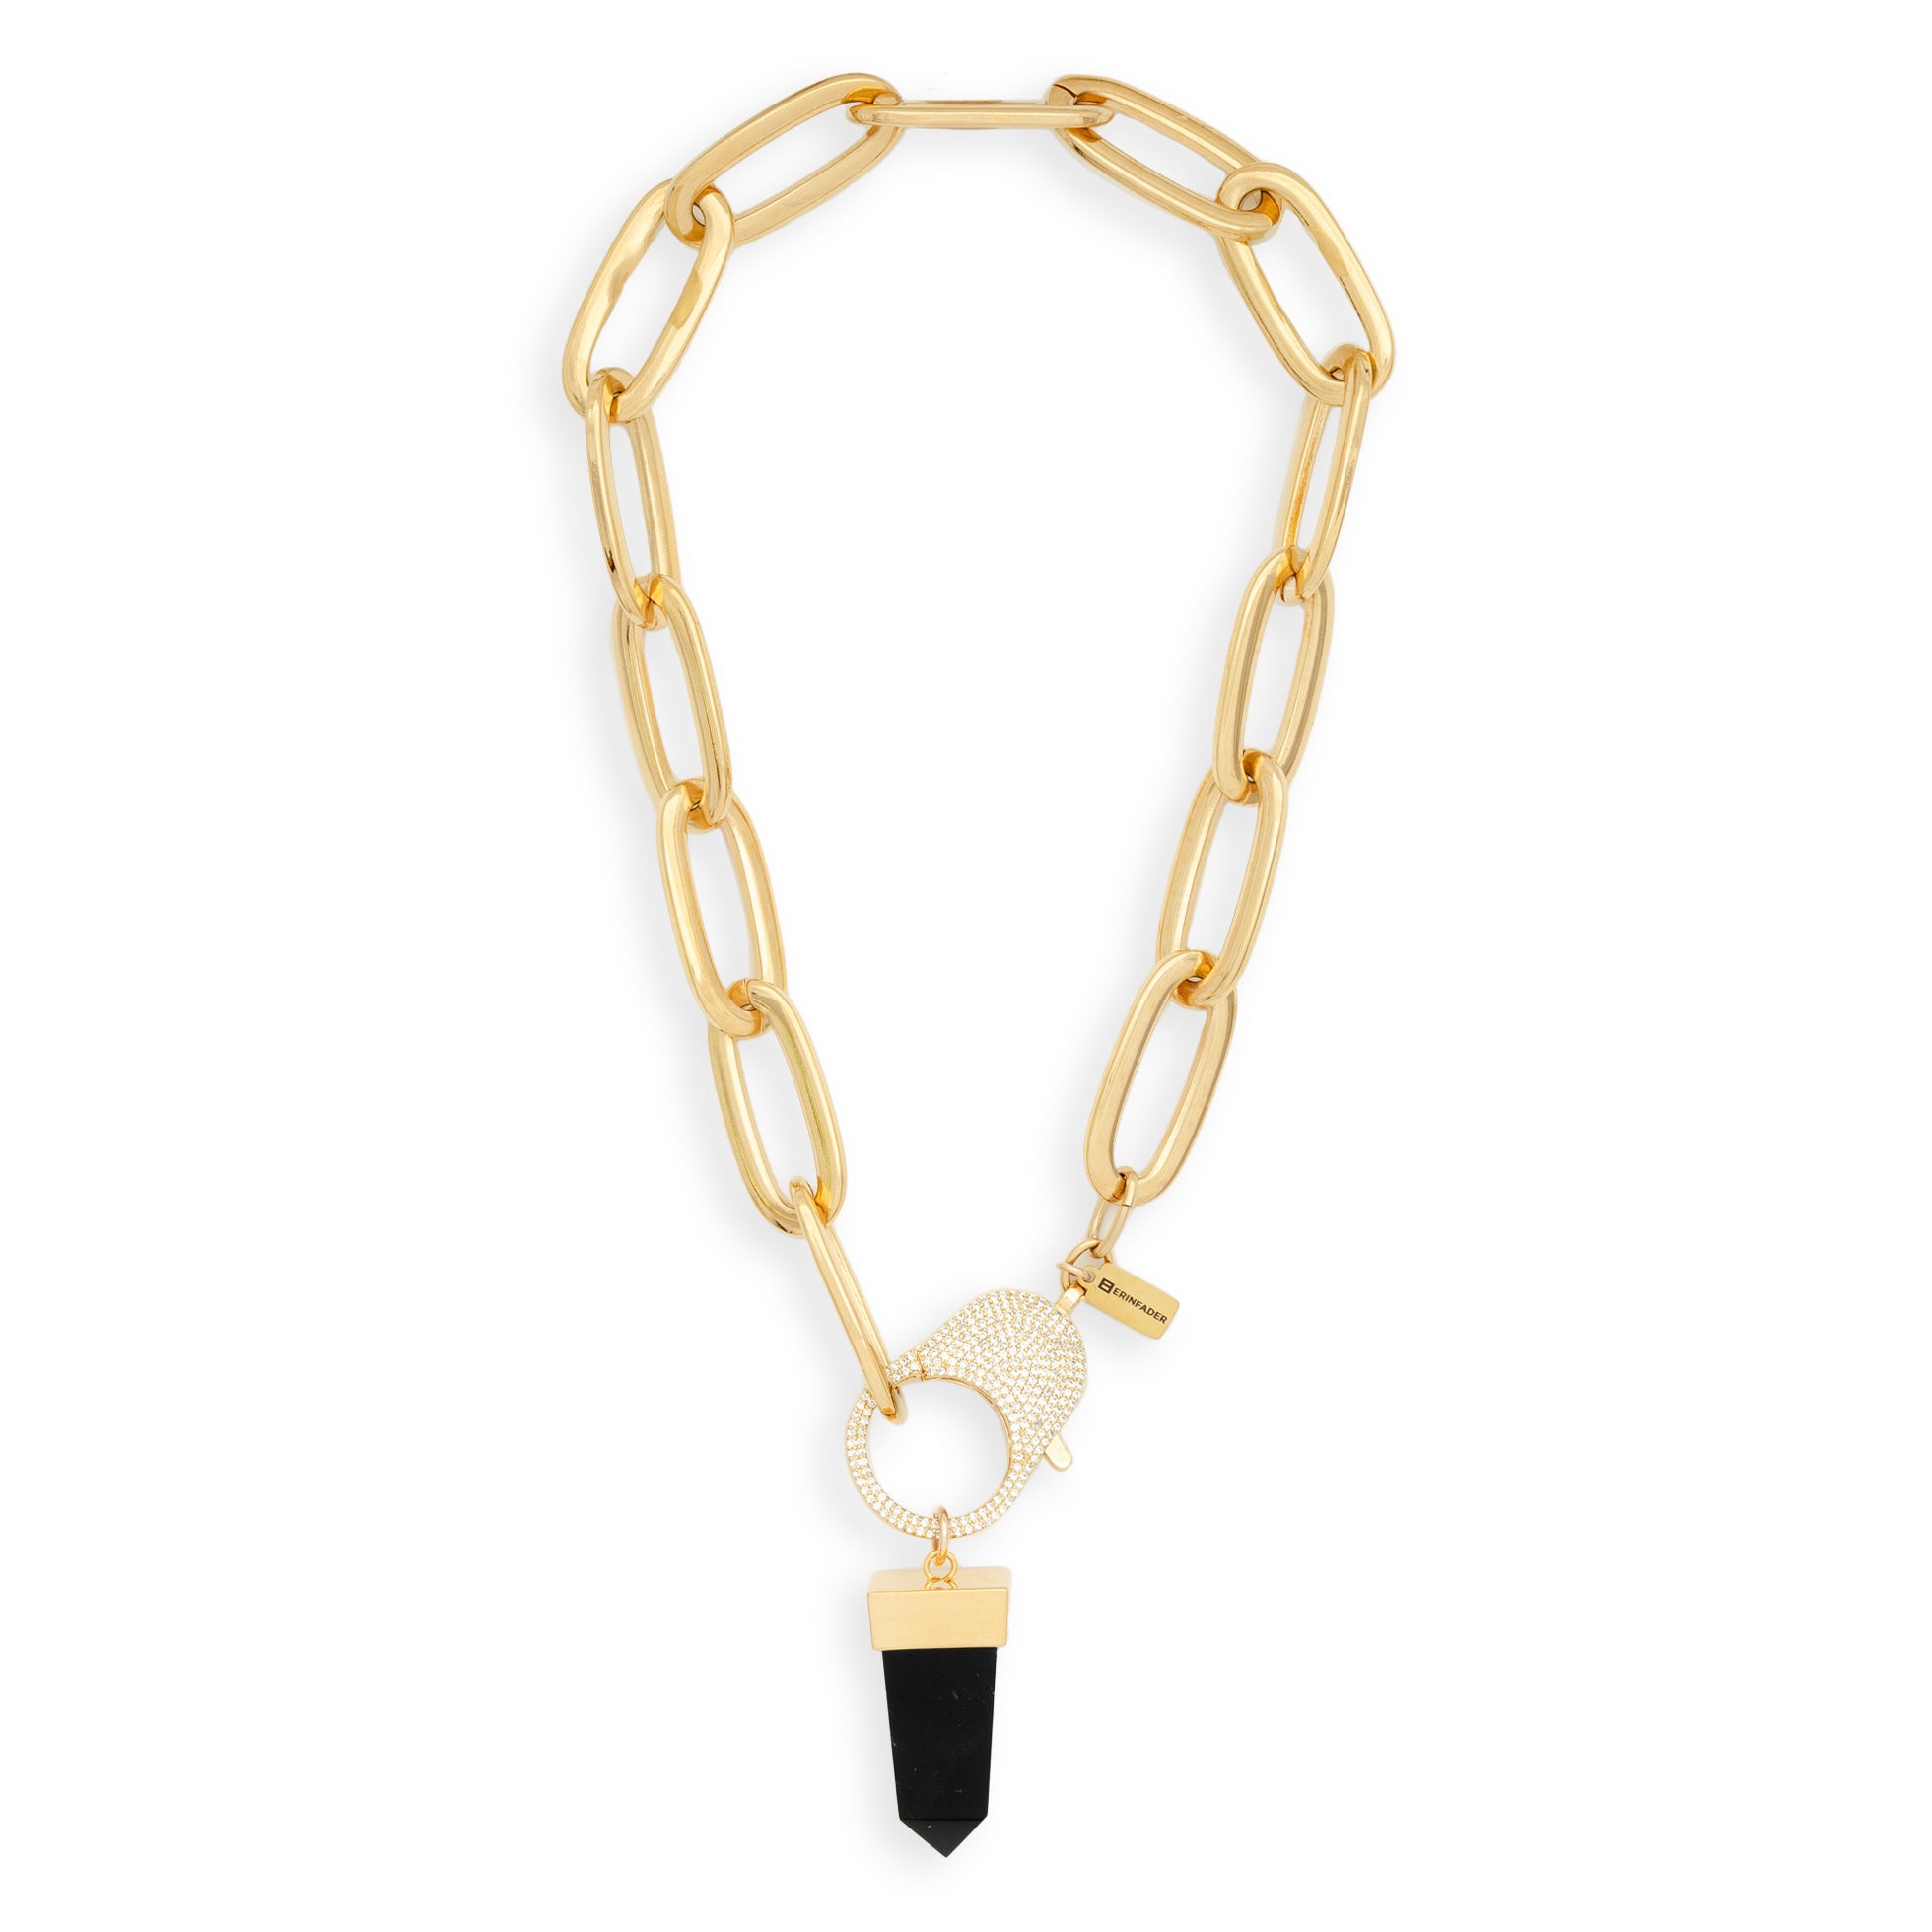 Gold Flex Choker with Onyx Pendant by Erin Fader Jewelry